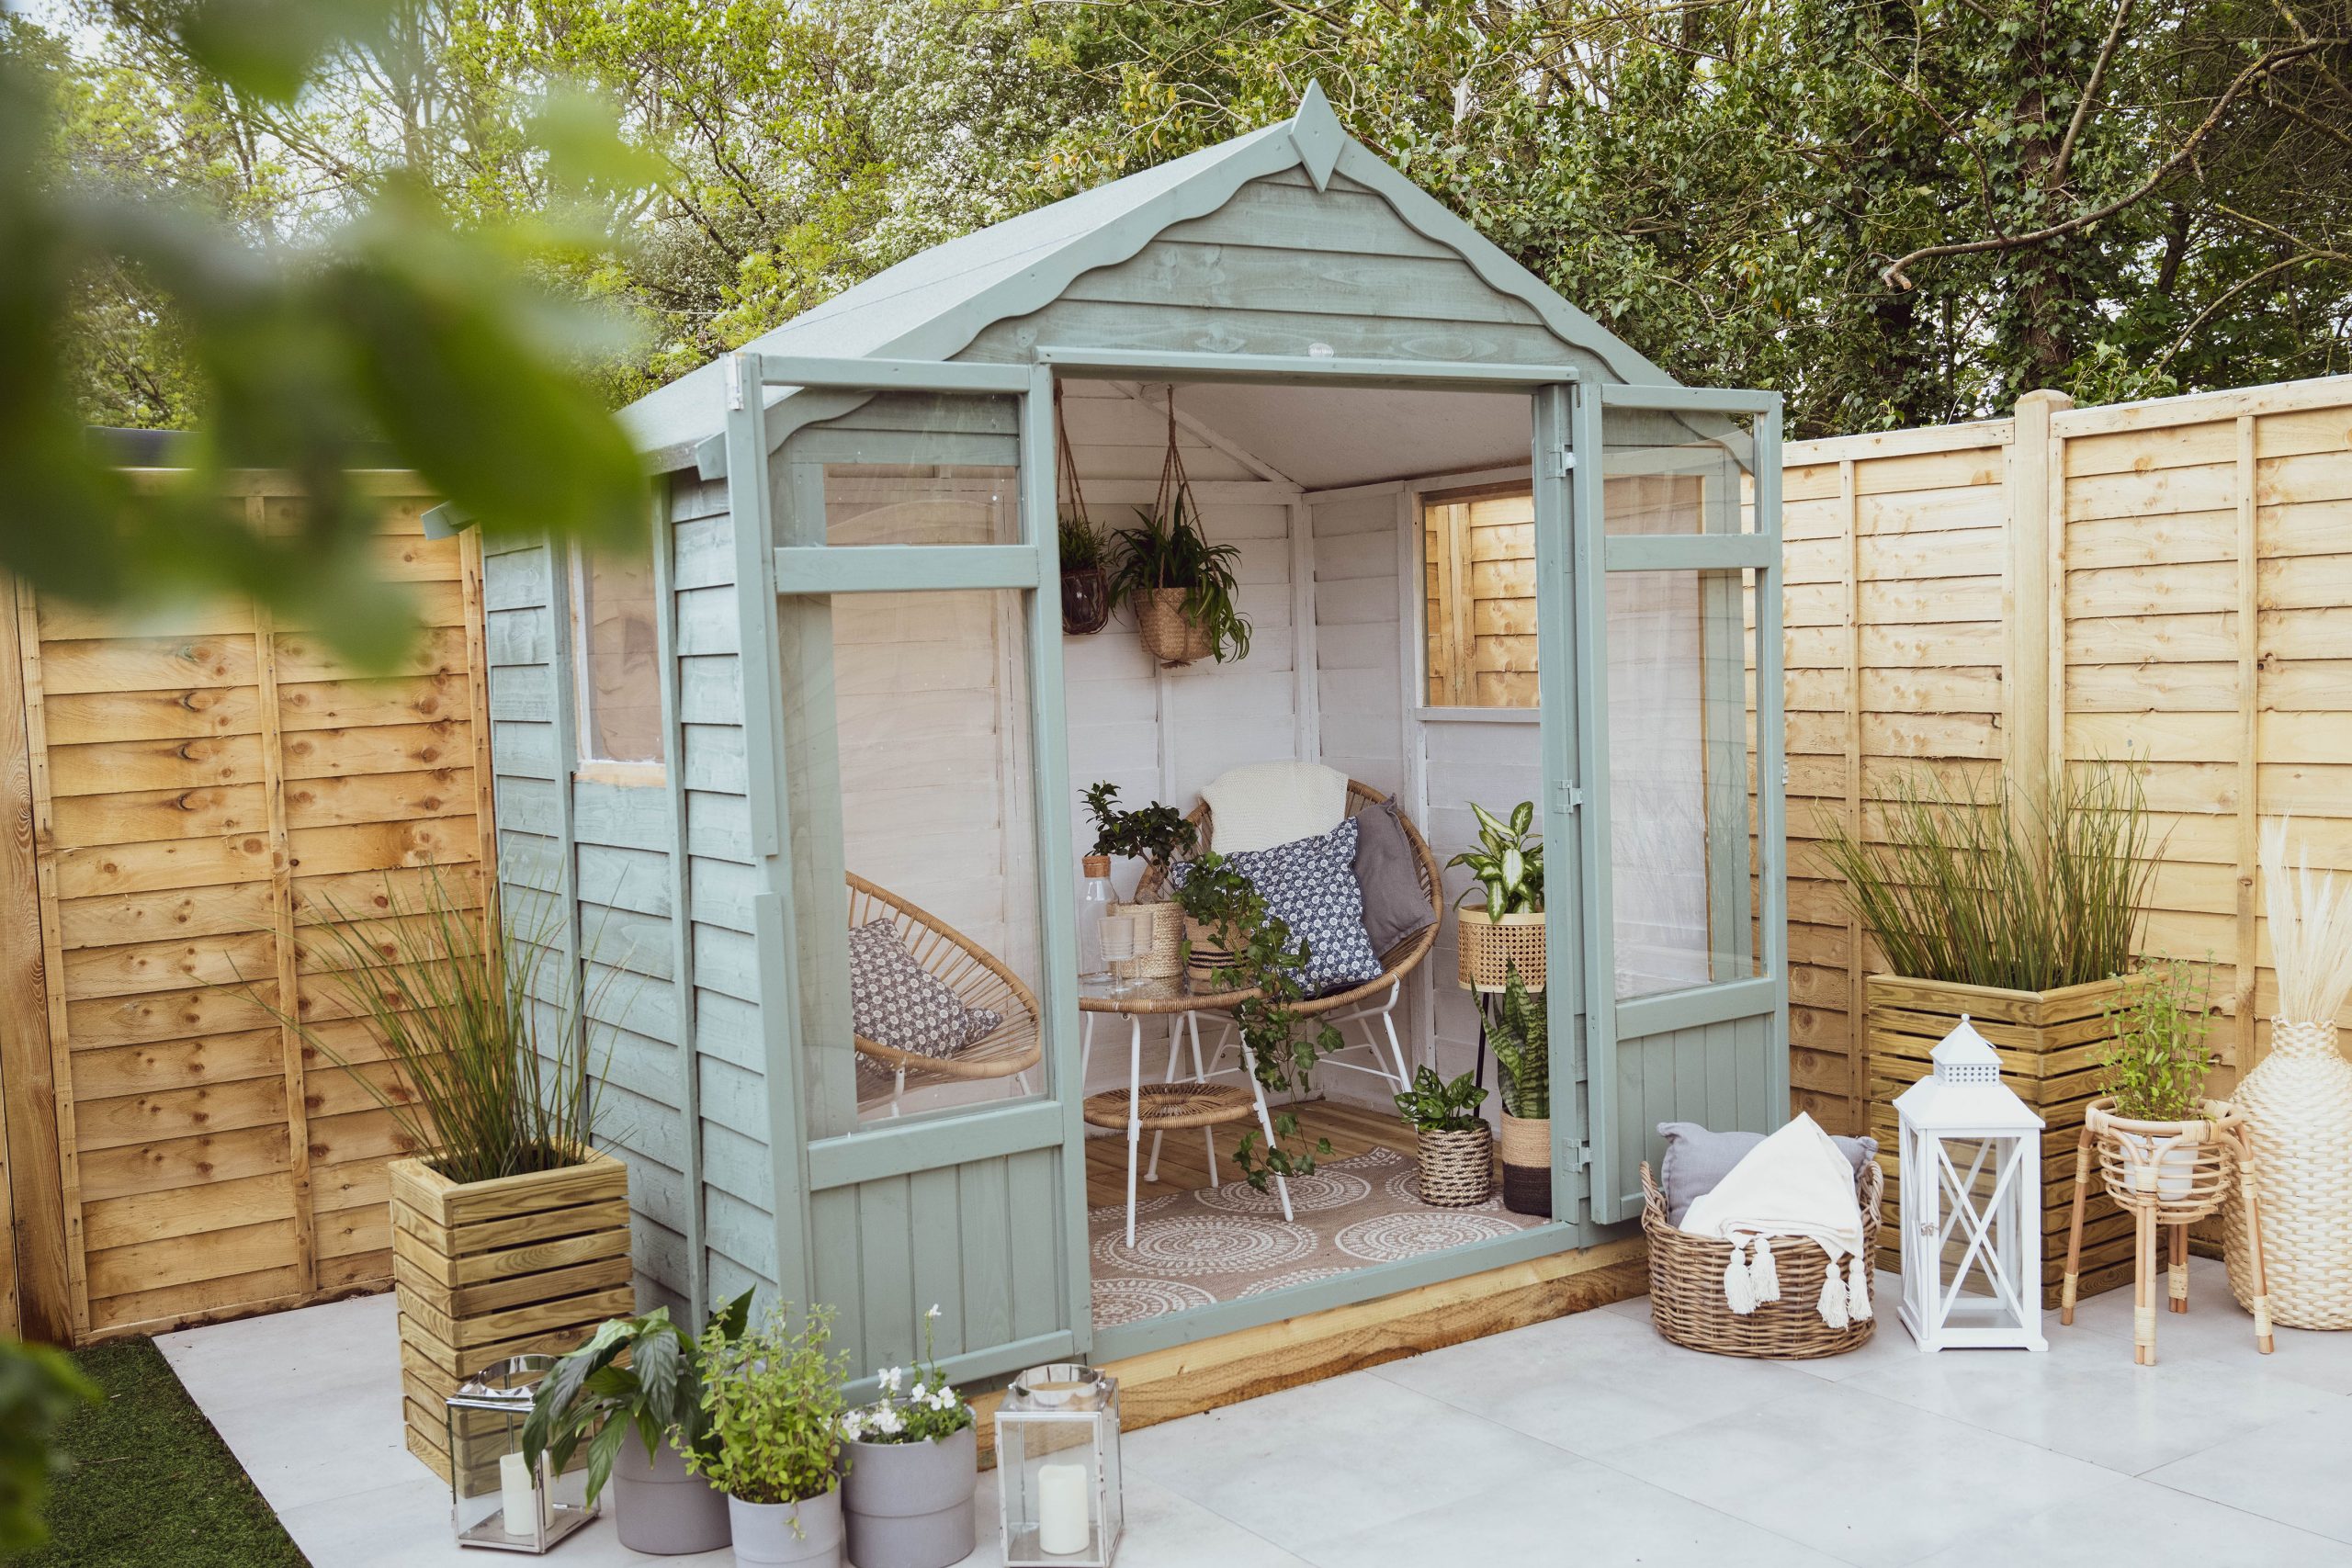 At the bottom of the garden, a Forest Oakley Summerhouse from shedstore.co.uk.